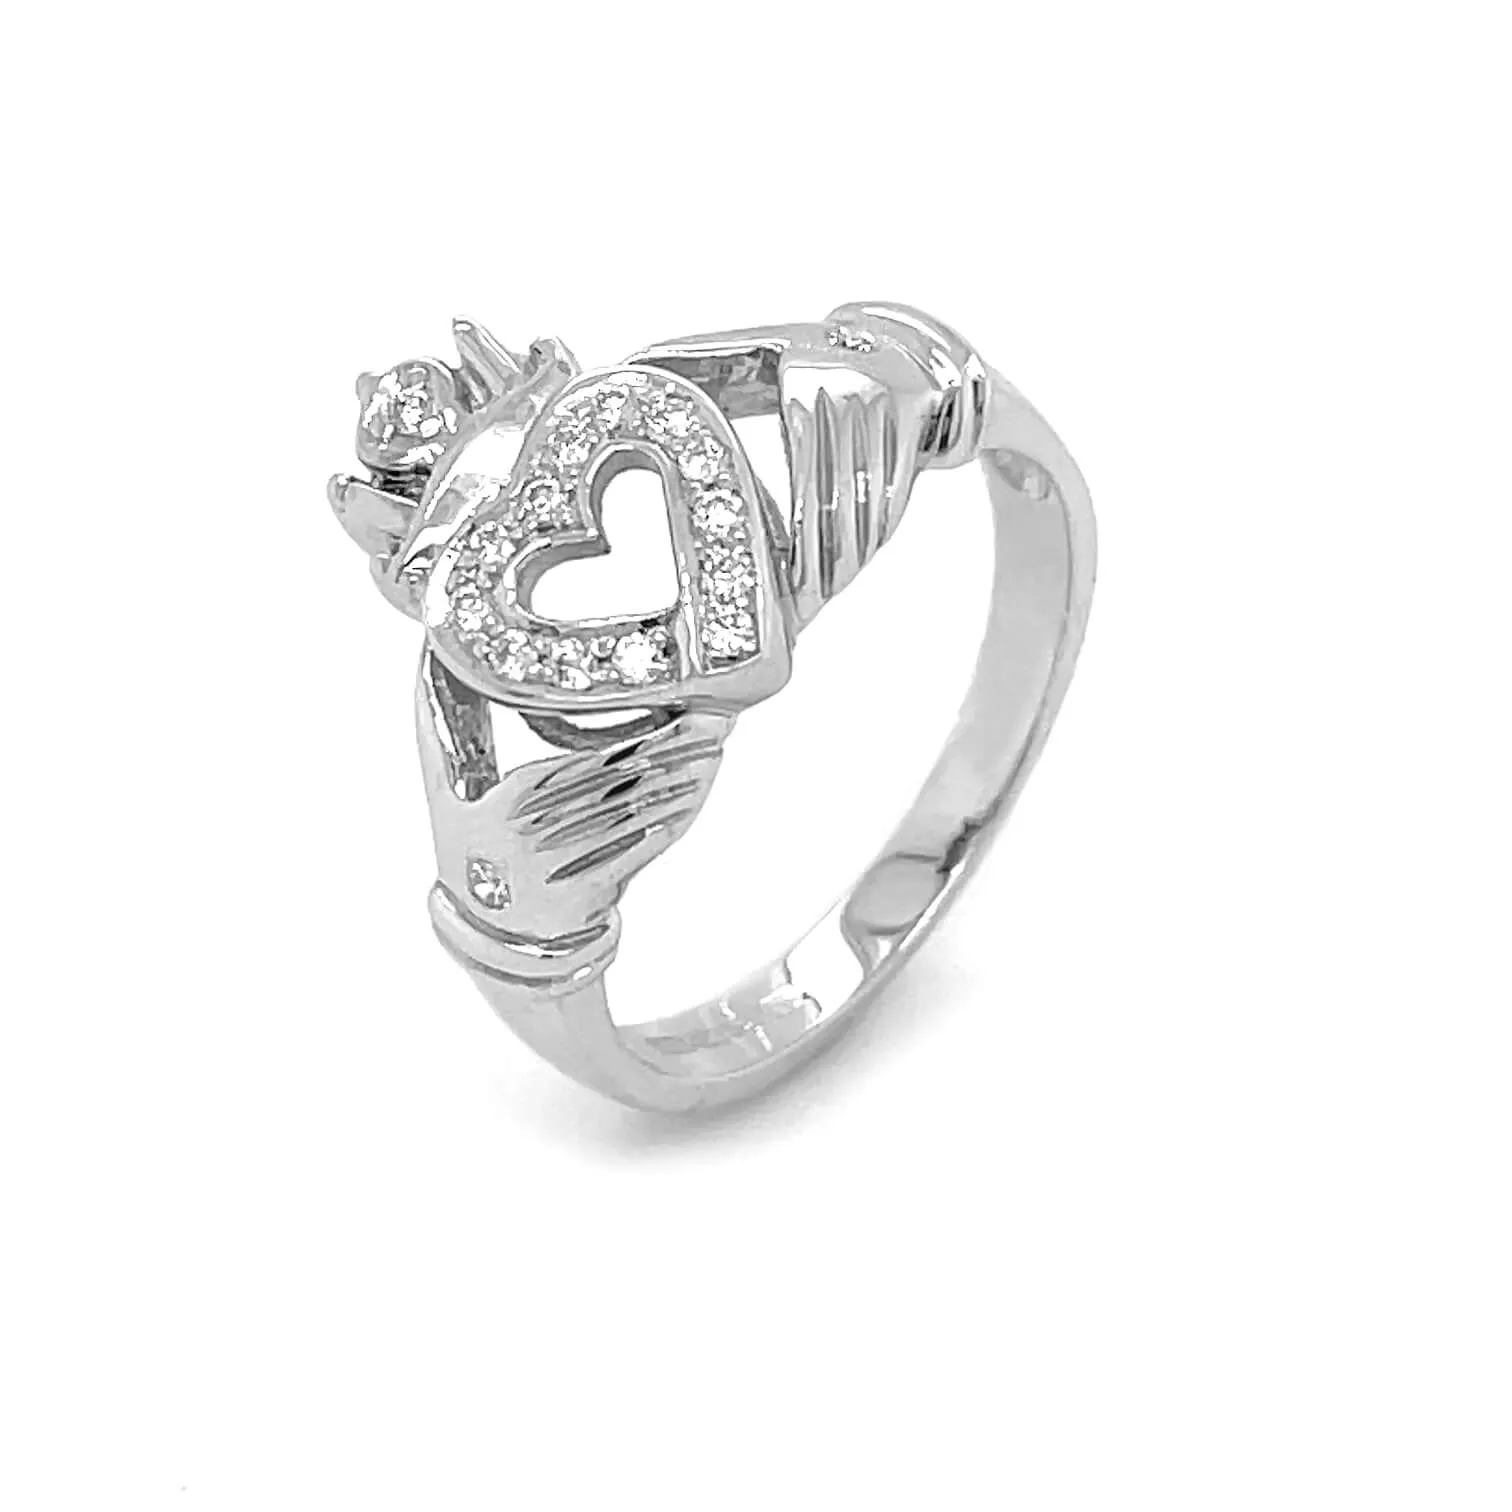 White Gold Open Heart Claddagh Ring 2 2